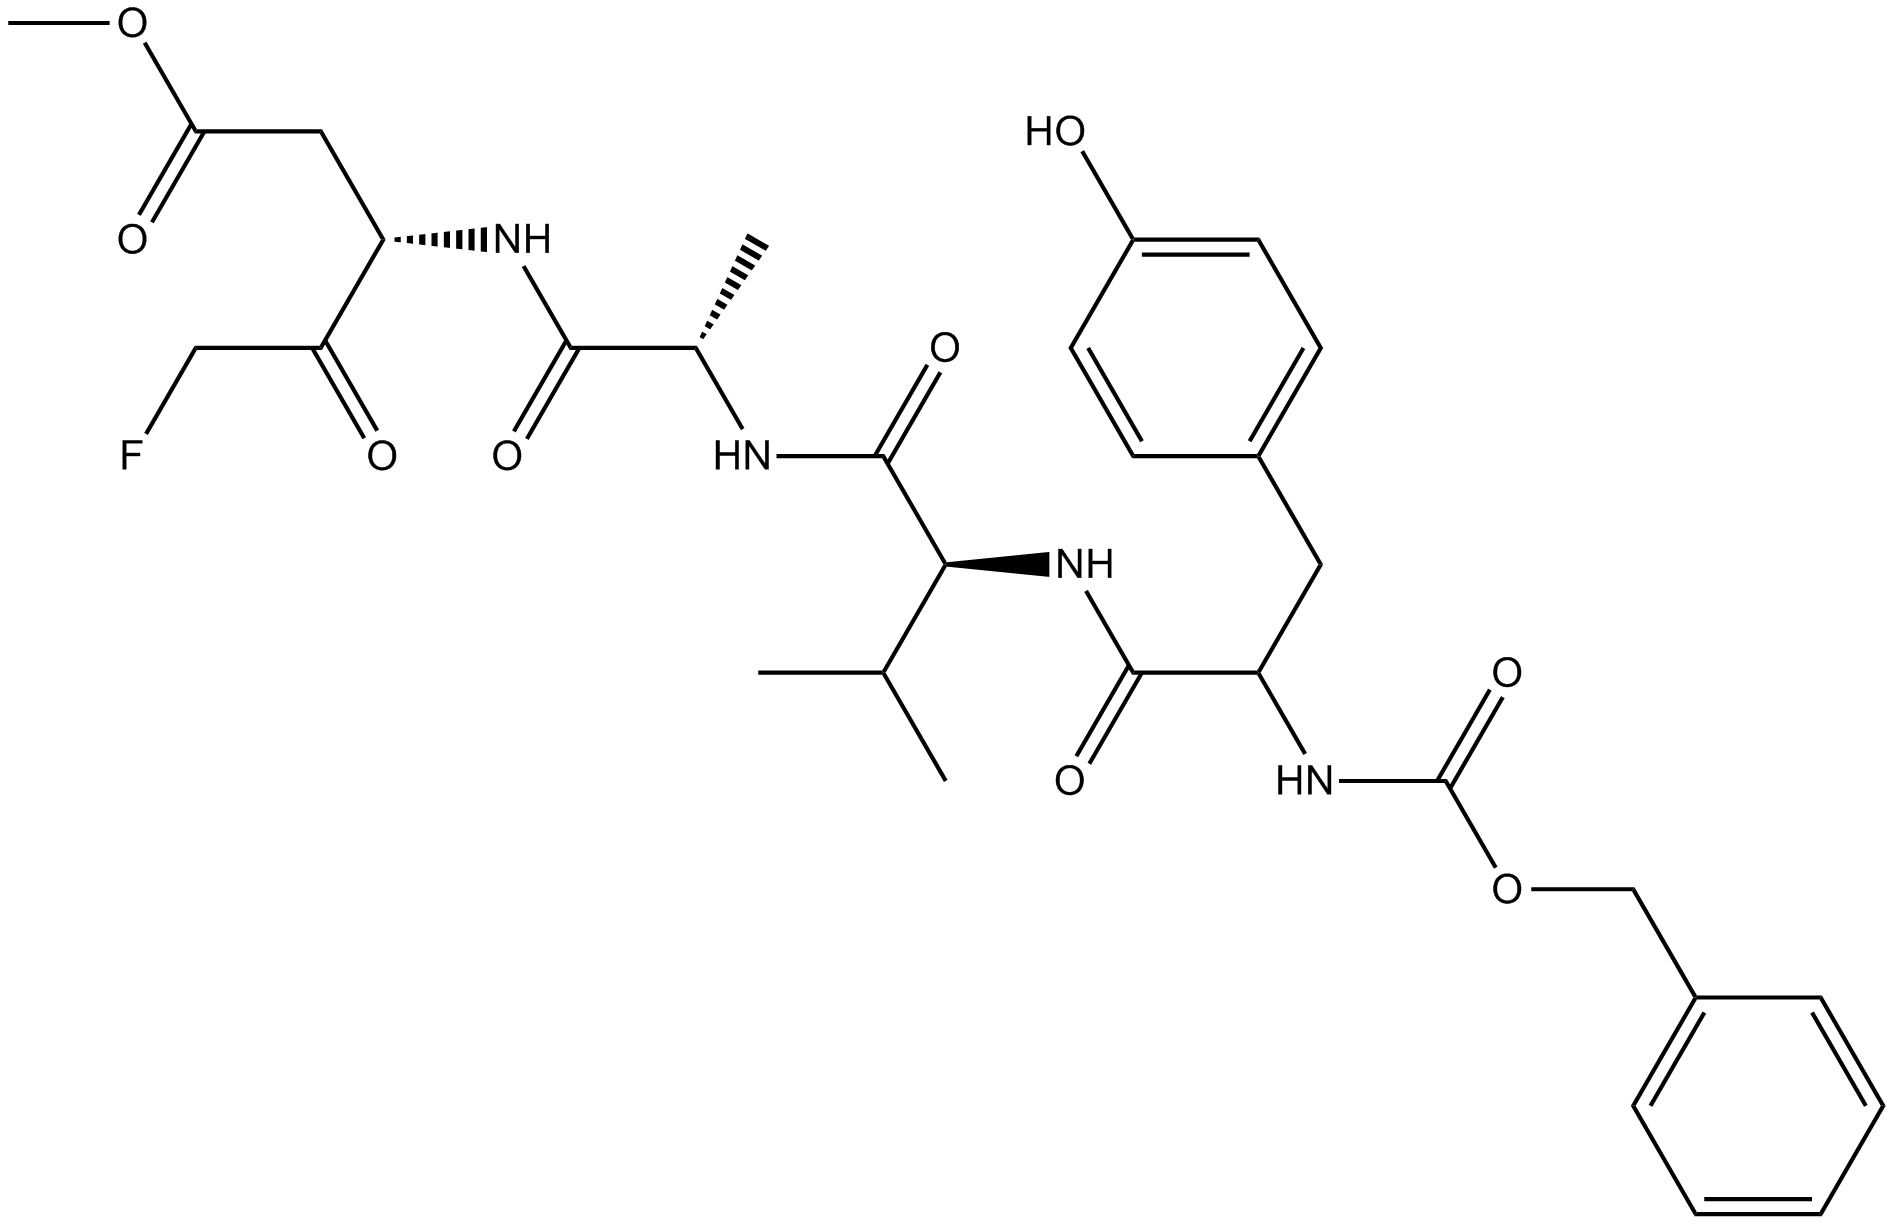 Z-YVAD-FMK  Chemical Structure